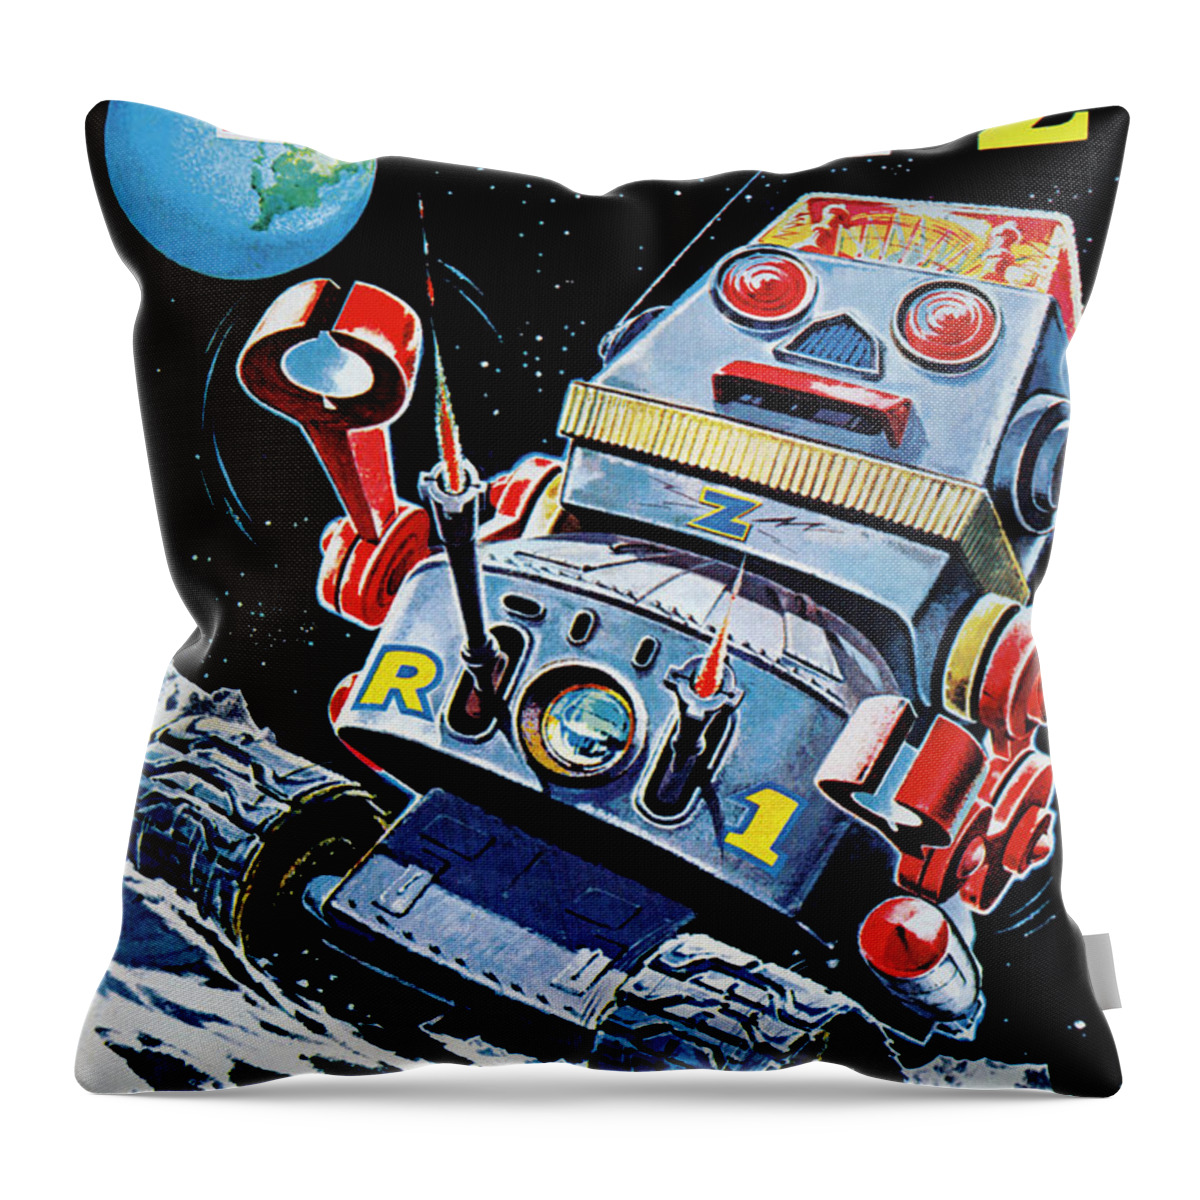 Vintage Toy Posters Throw Pillow featuring the drawing Robotank-Z Space Robot #1 by Vintage Toy Posters